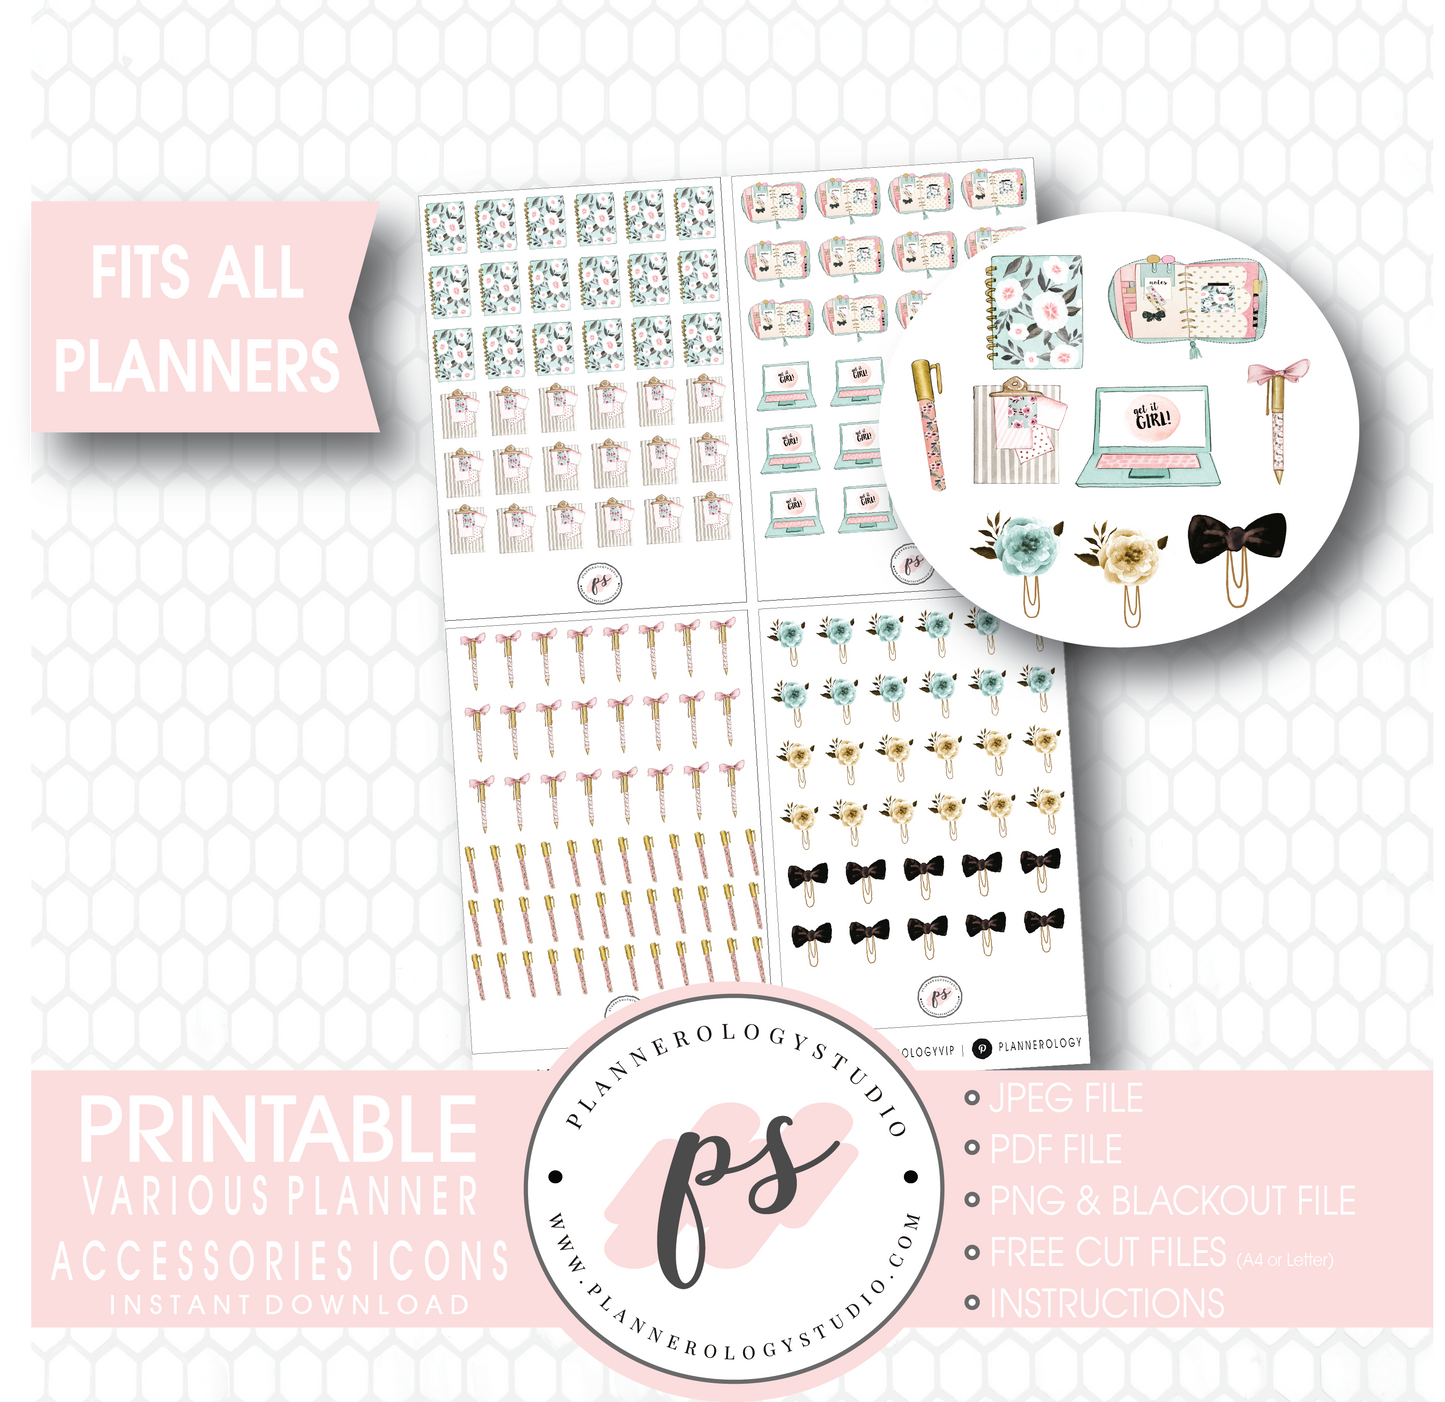 Various Planner Stationery & Accessories Icons Digital Printable Planner Stickers - Plannerologystudio